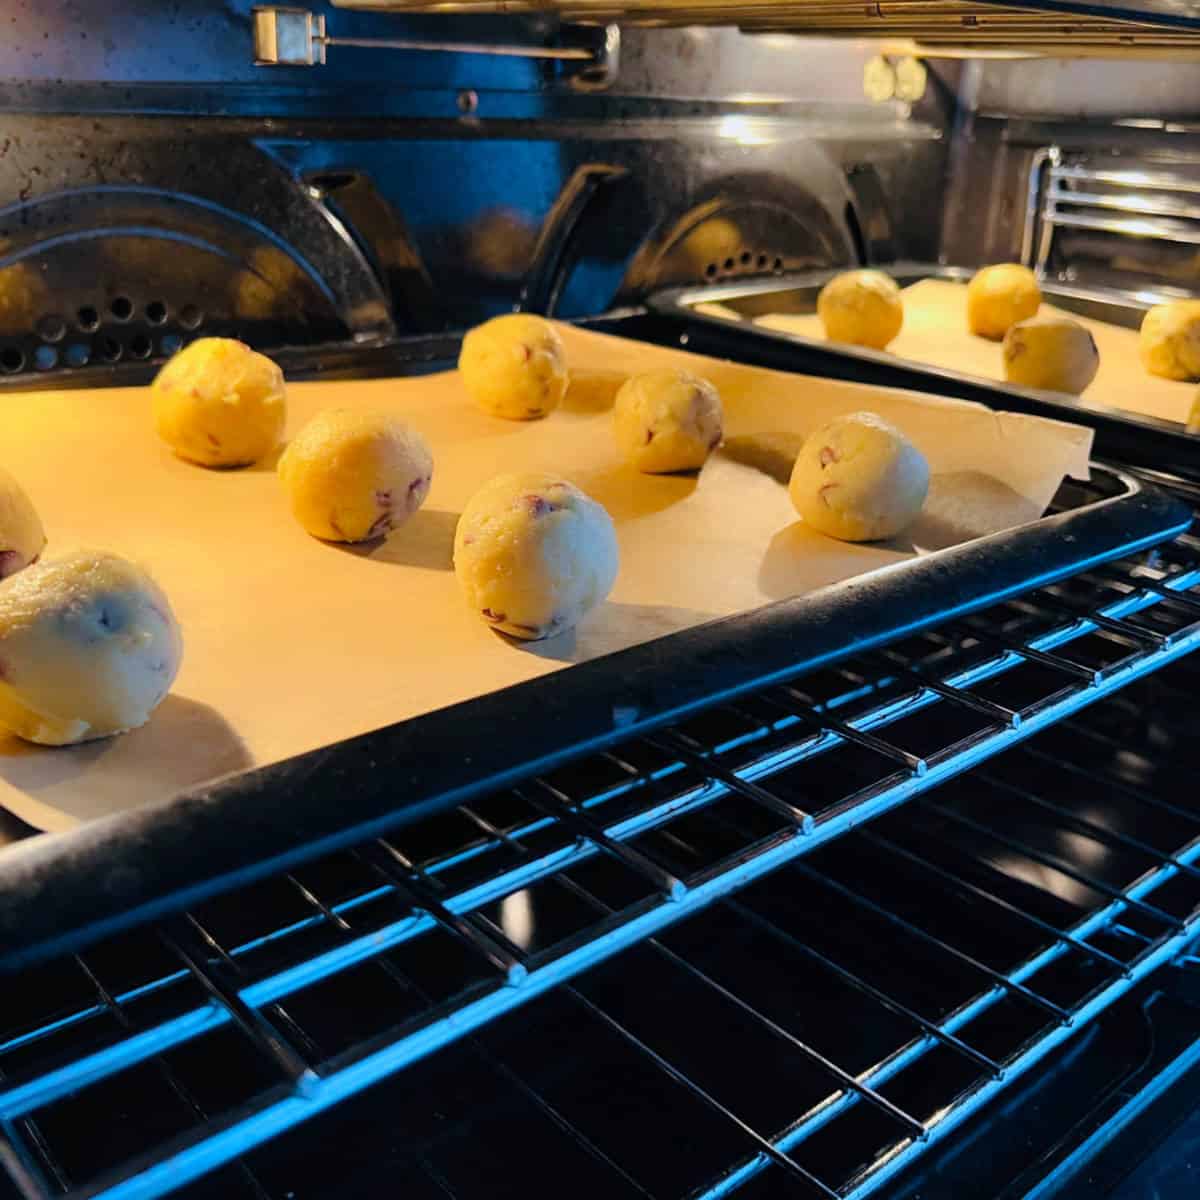 Bake in a preheated oven until fully done.